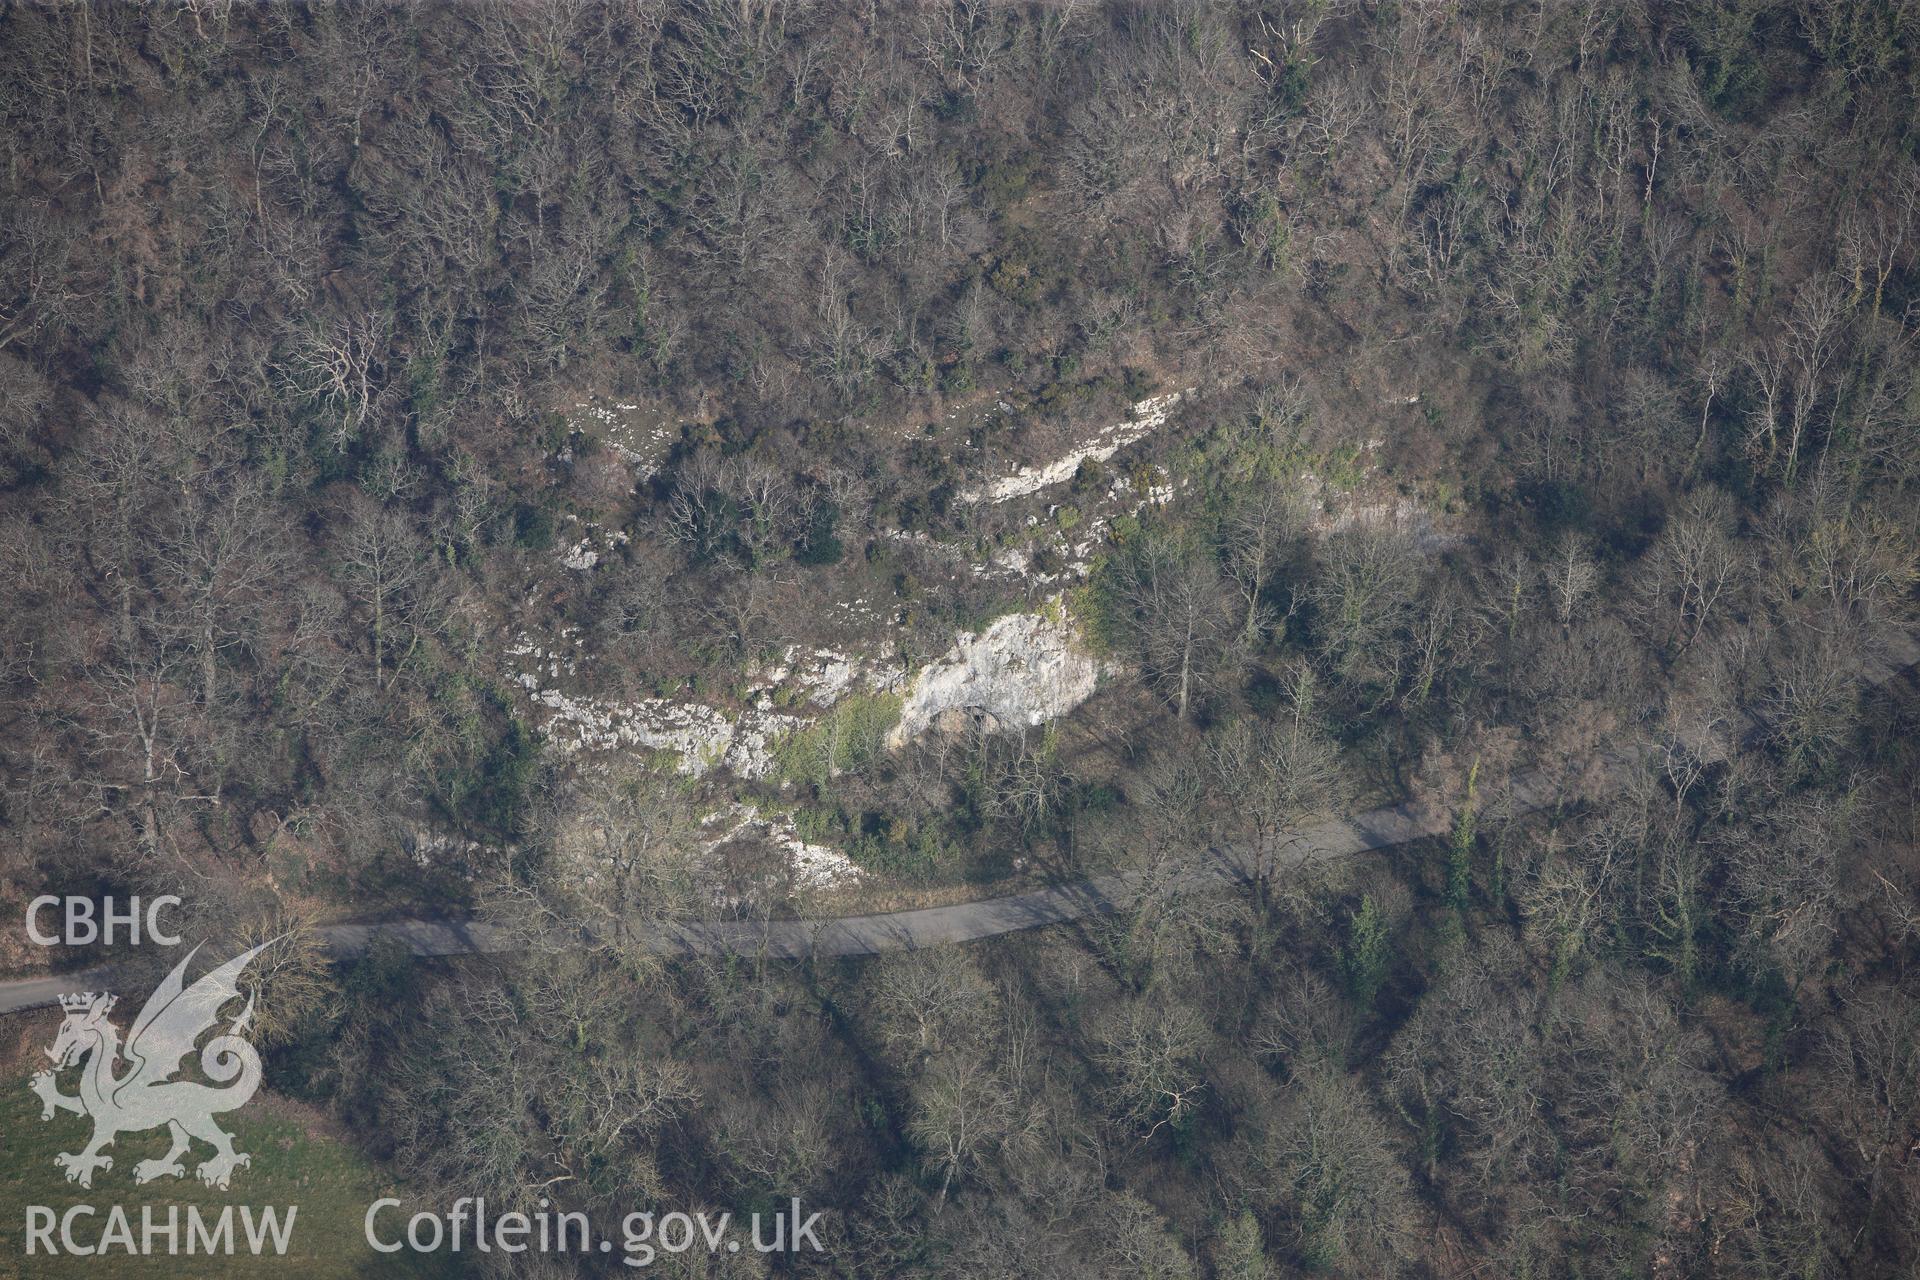 Bont-Newydd cave, Bont-newydd, north west of Denbigh. Oblique aerial photograph taken during the Royal Commission?s programme of archaeological aerial reconnaissance by Toby Driver on 28th February 2013.